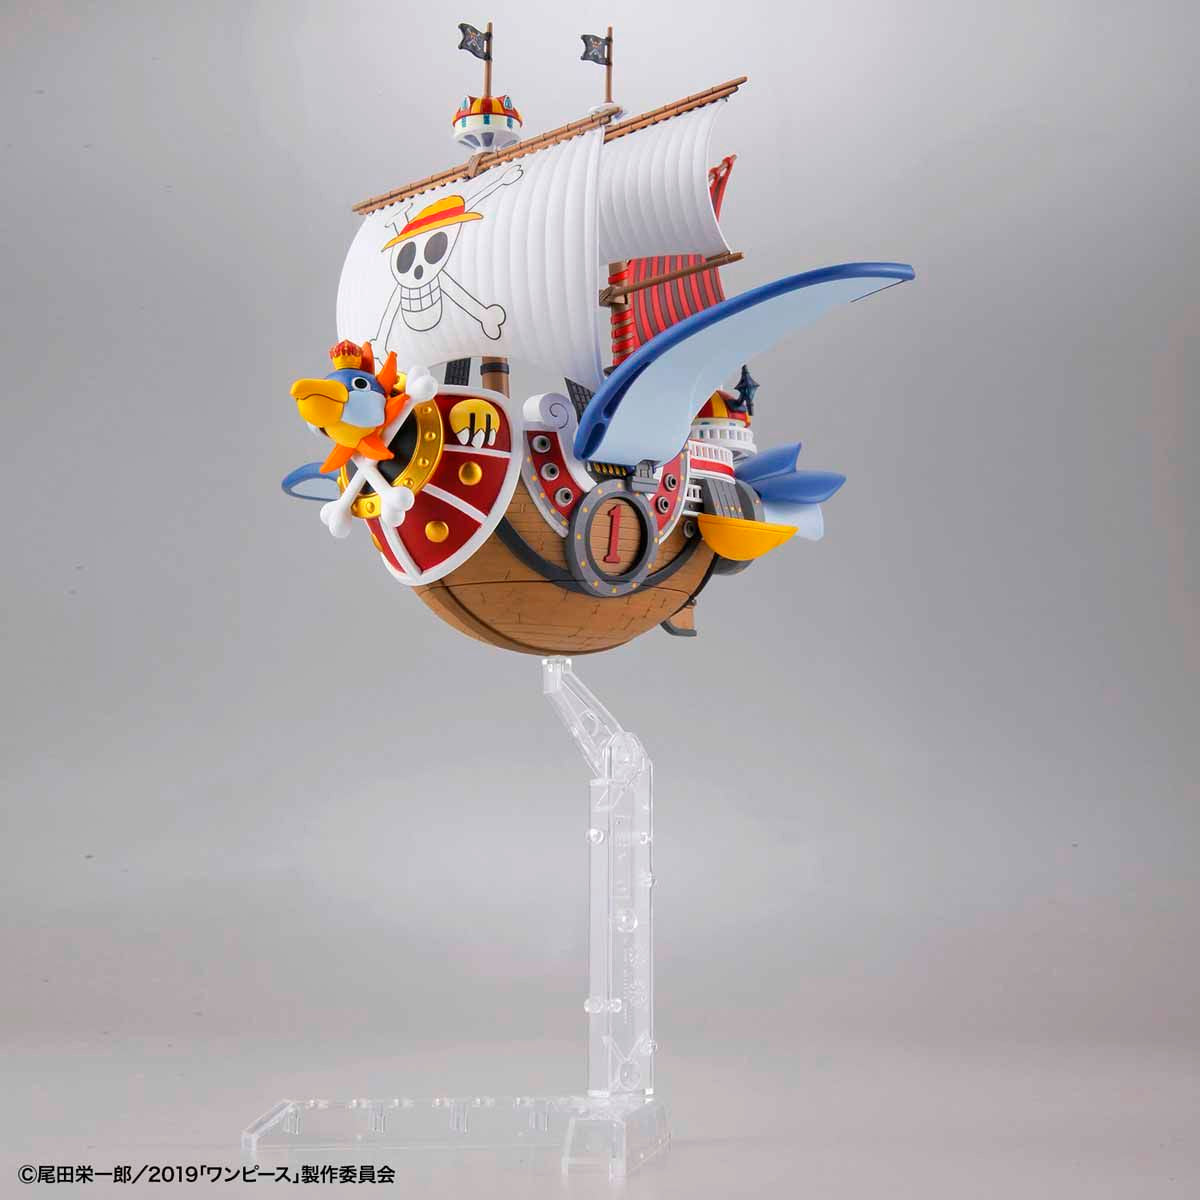 One Piece - Thousand Sunny Flying Model